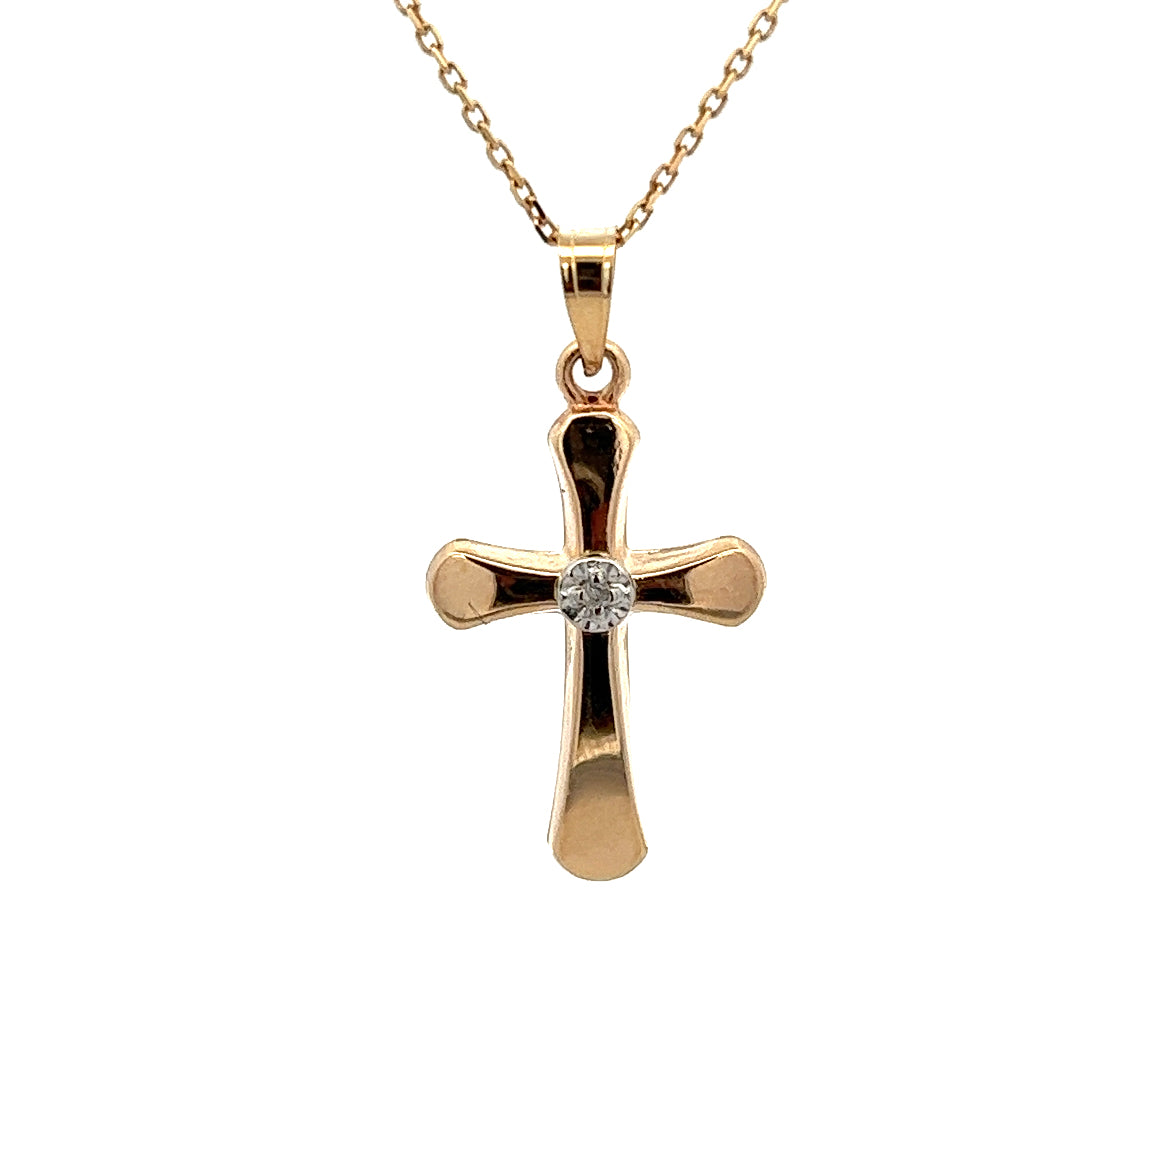 14K GOLD CROSS WITH ROUND EDGES AND CRYSTAL